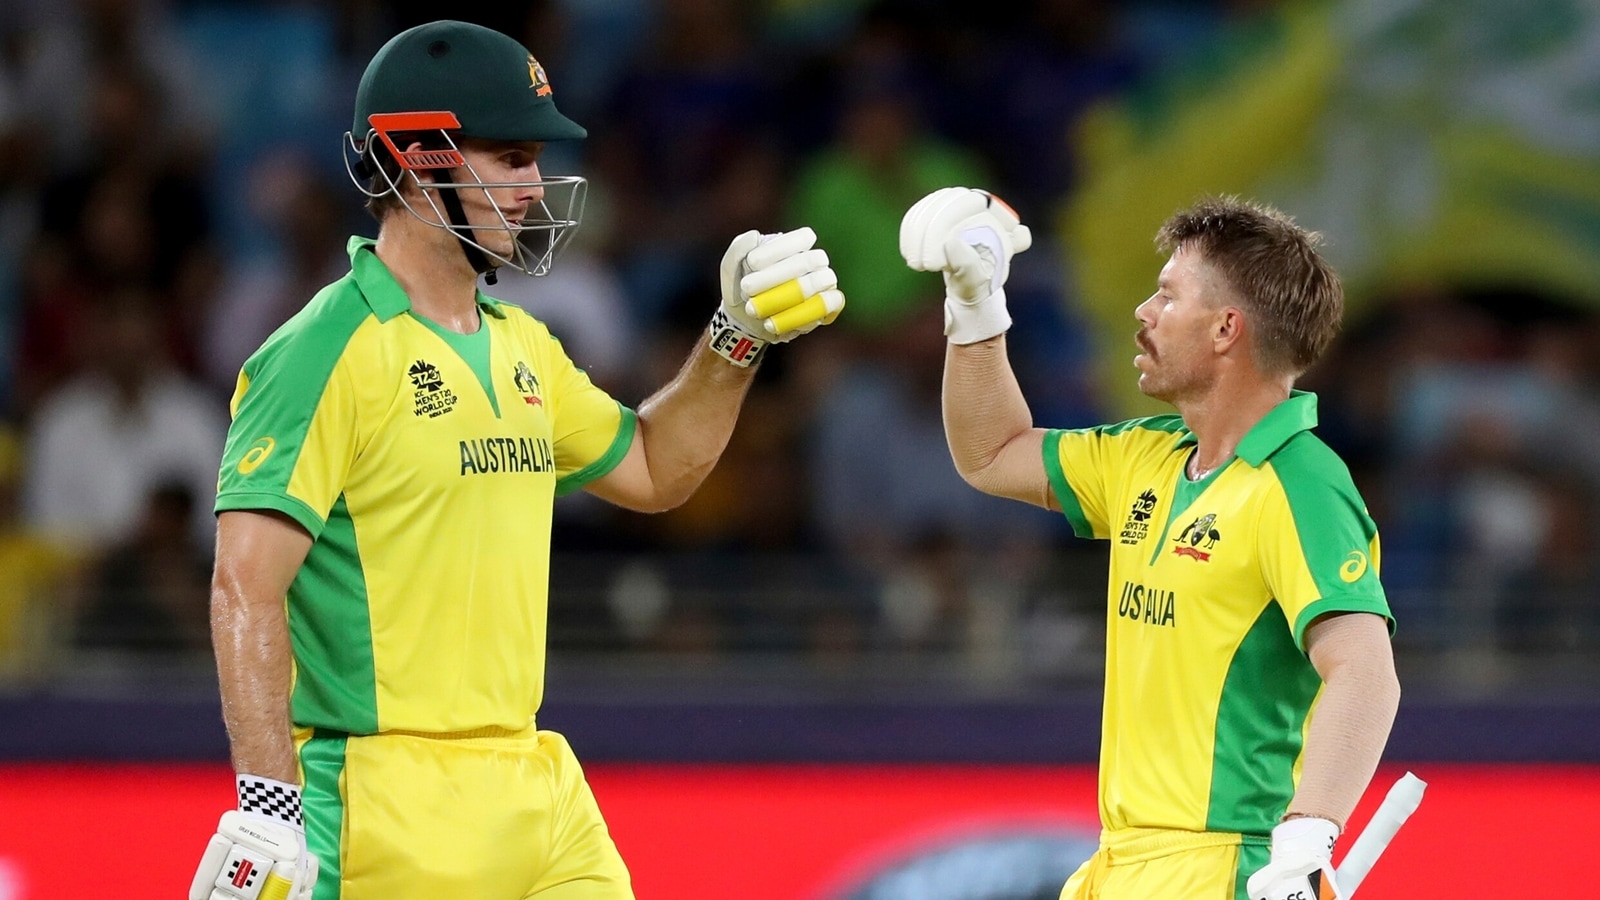 T20 World Cup, final: Mitchell Marsh, David Warner shine as Australia beat New Zealand by 8 wickets to win maiden title | Cricket - Hindustan Times